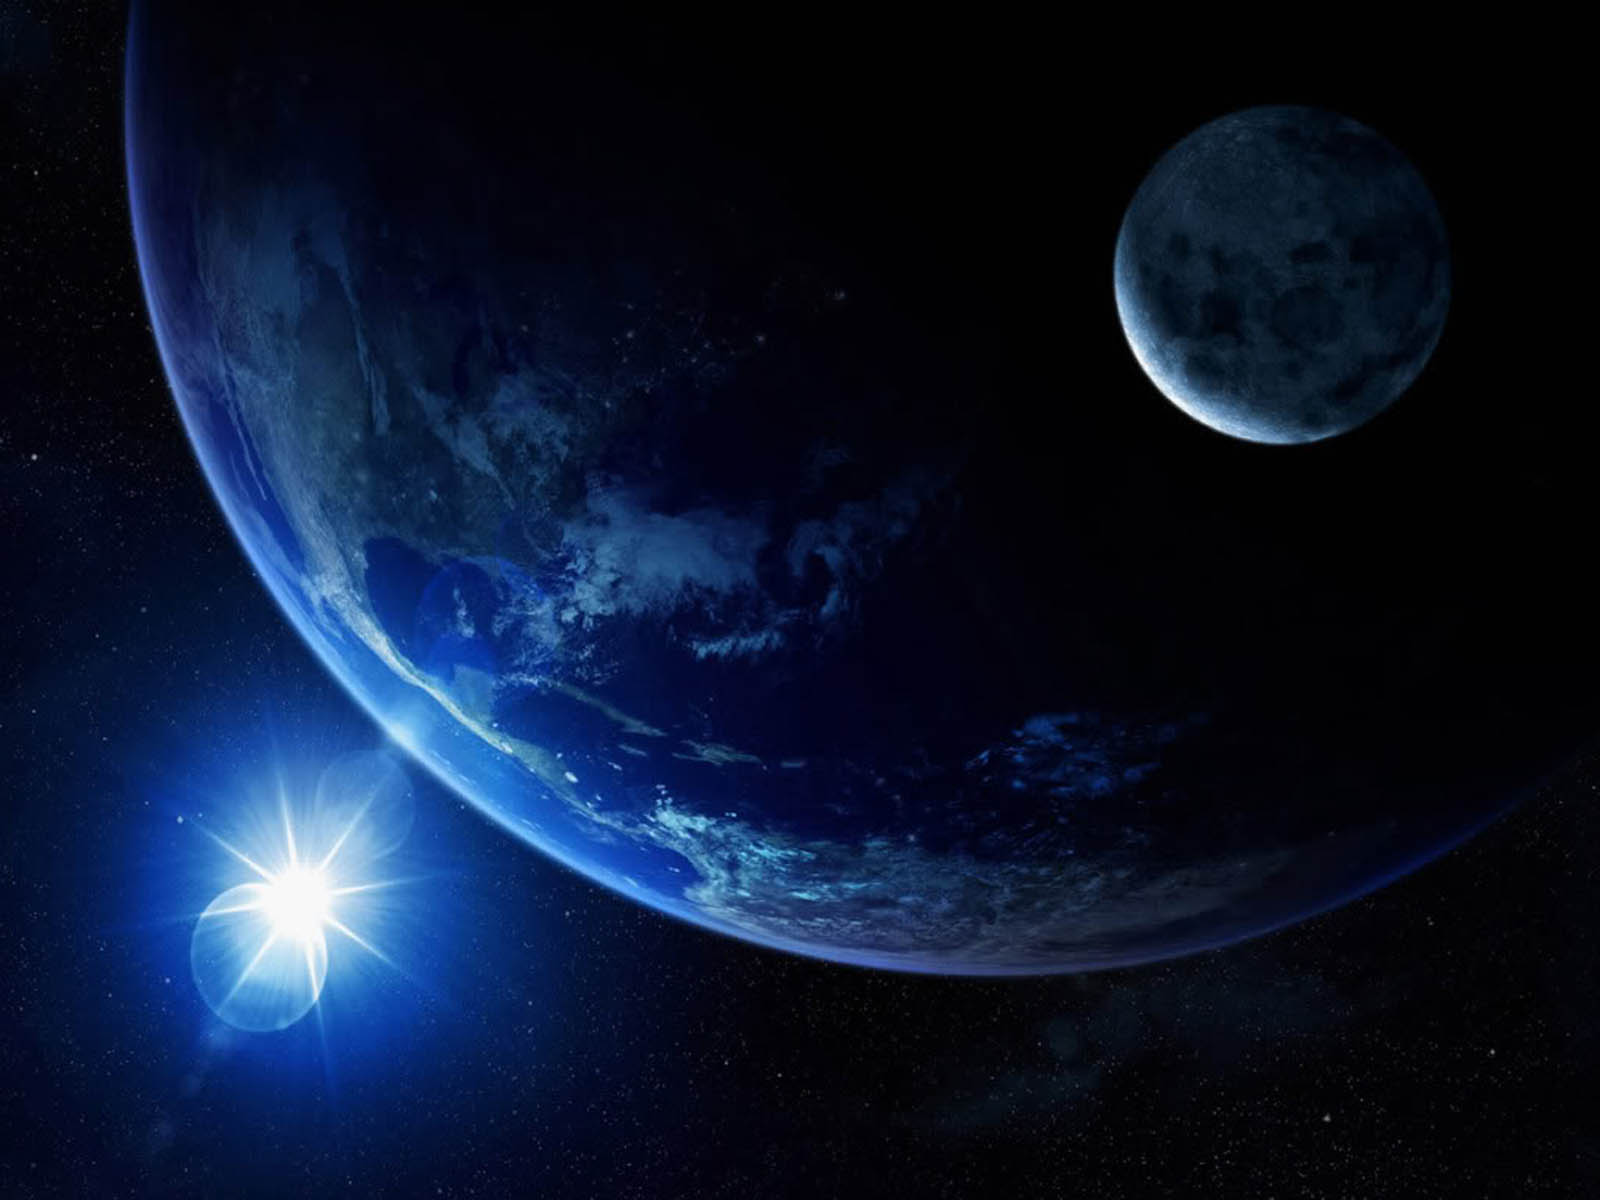 Tag Earth And Moon Wallpaper Background Photos Image